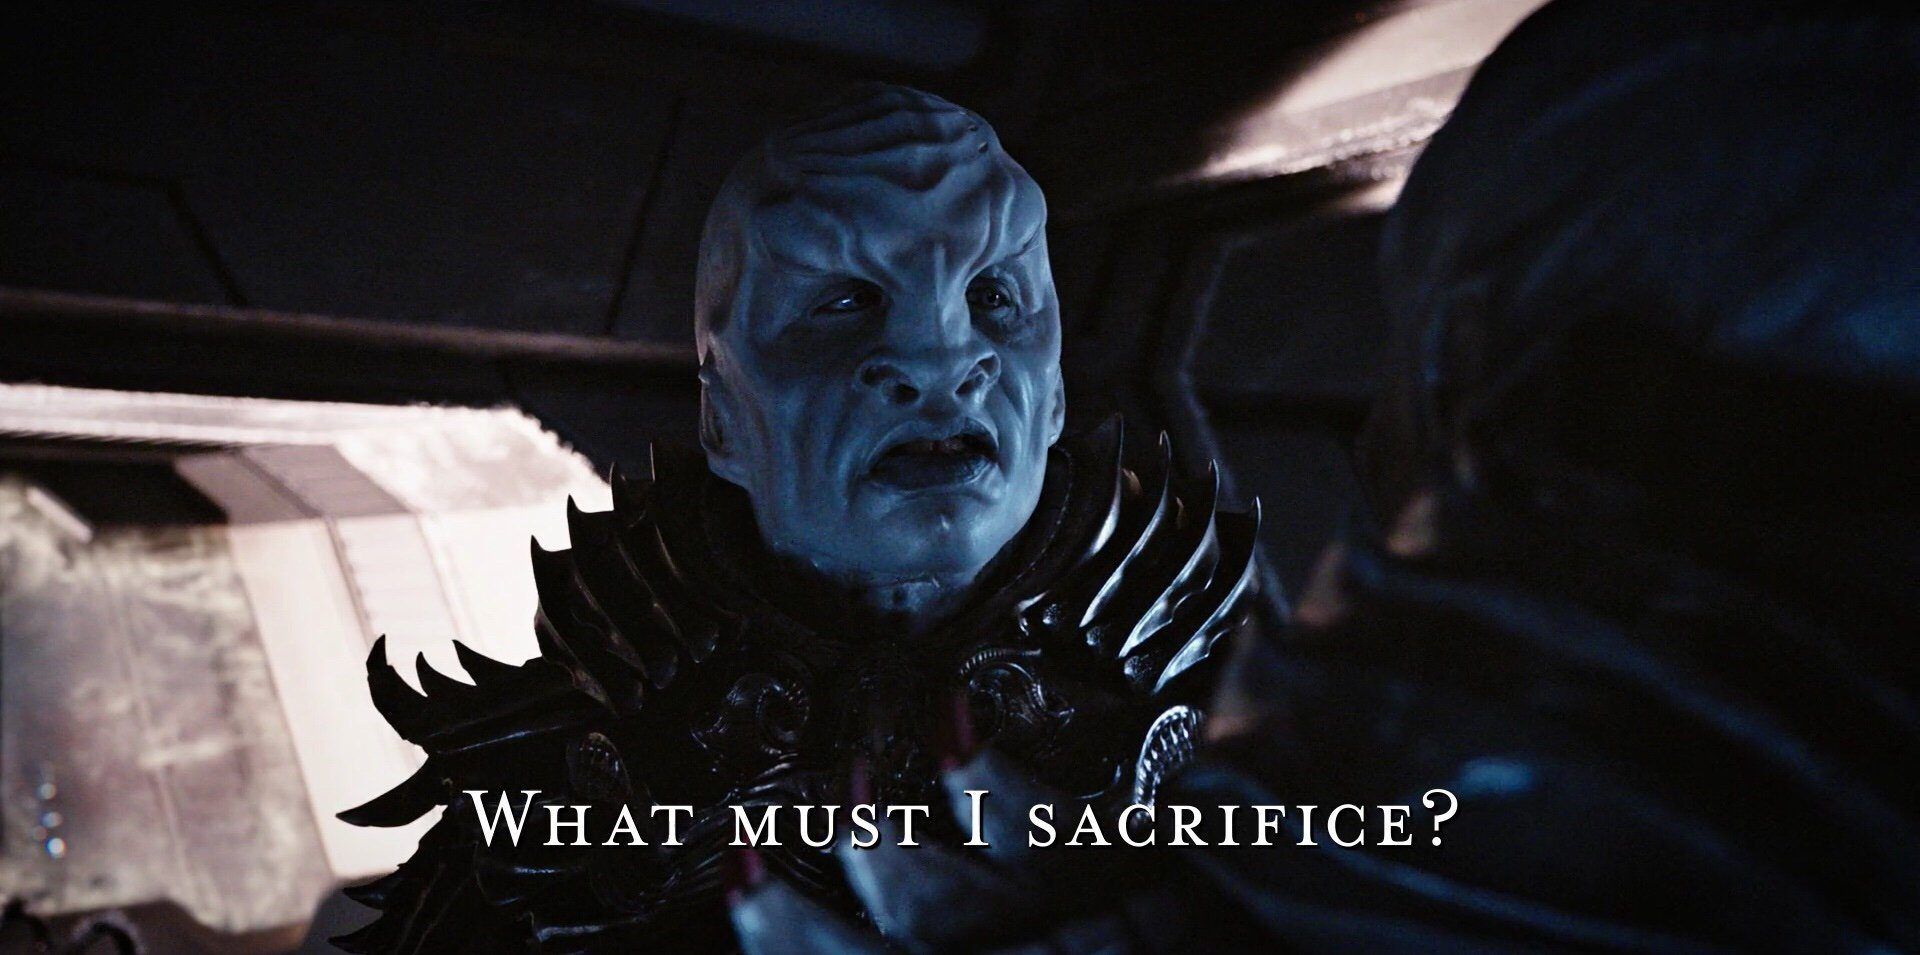 Pale Klingon asks What must I sacrifice? From TV show Discovery.